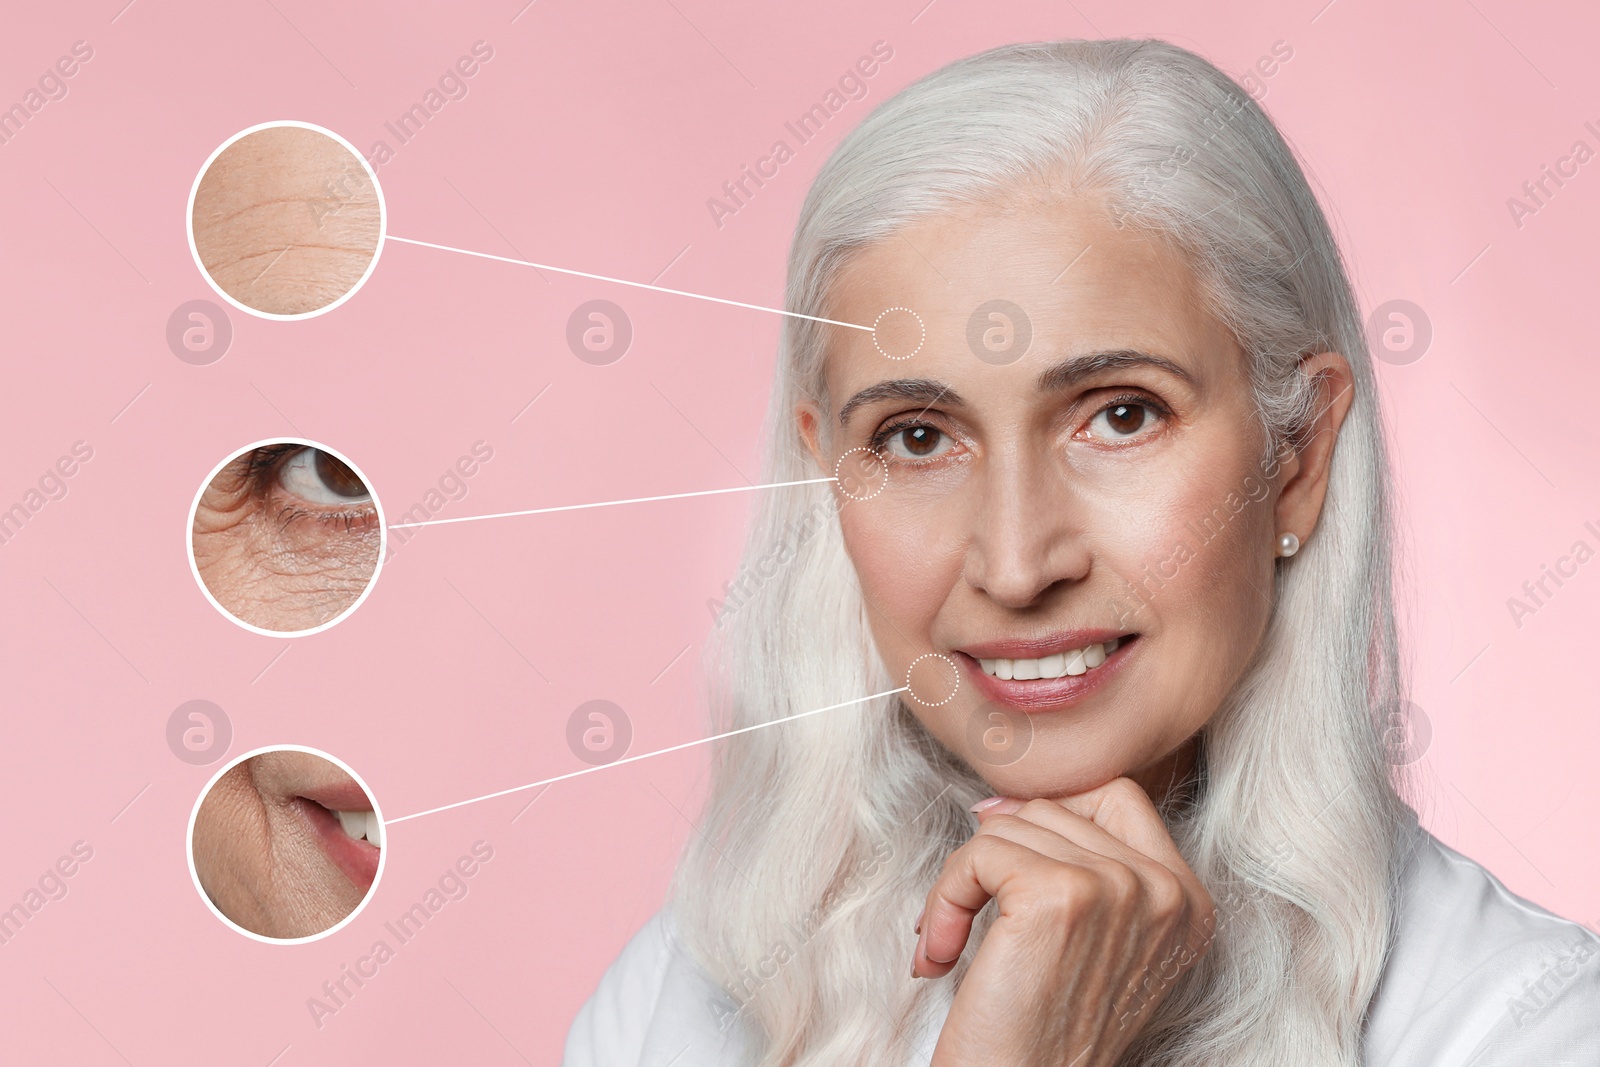 Image of Beautiful mature woman on pink background. Zoomed skin areas showing wrinkles before rejuvenation procedures